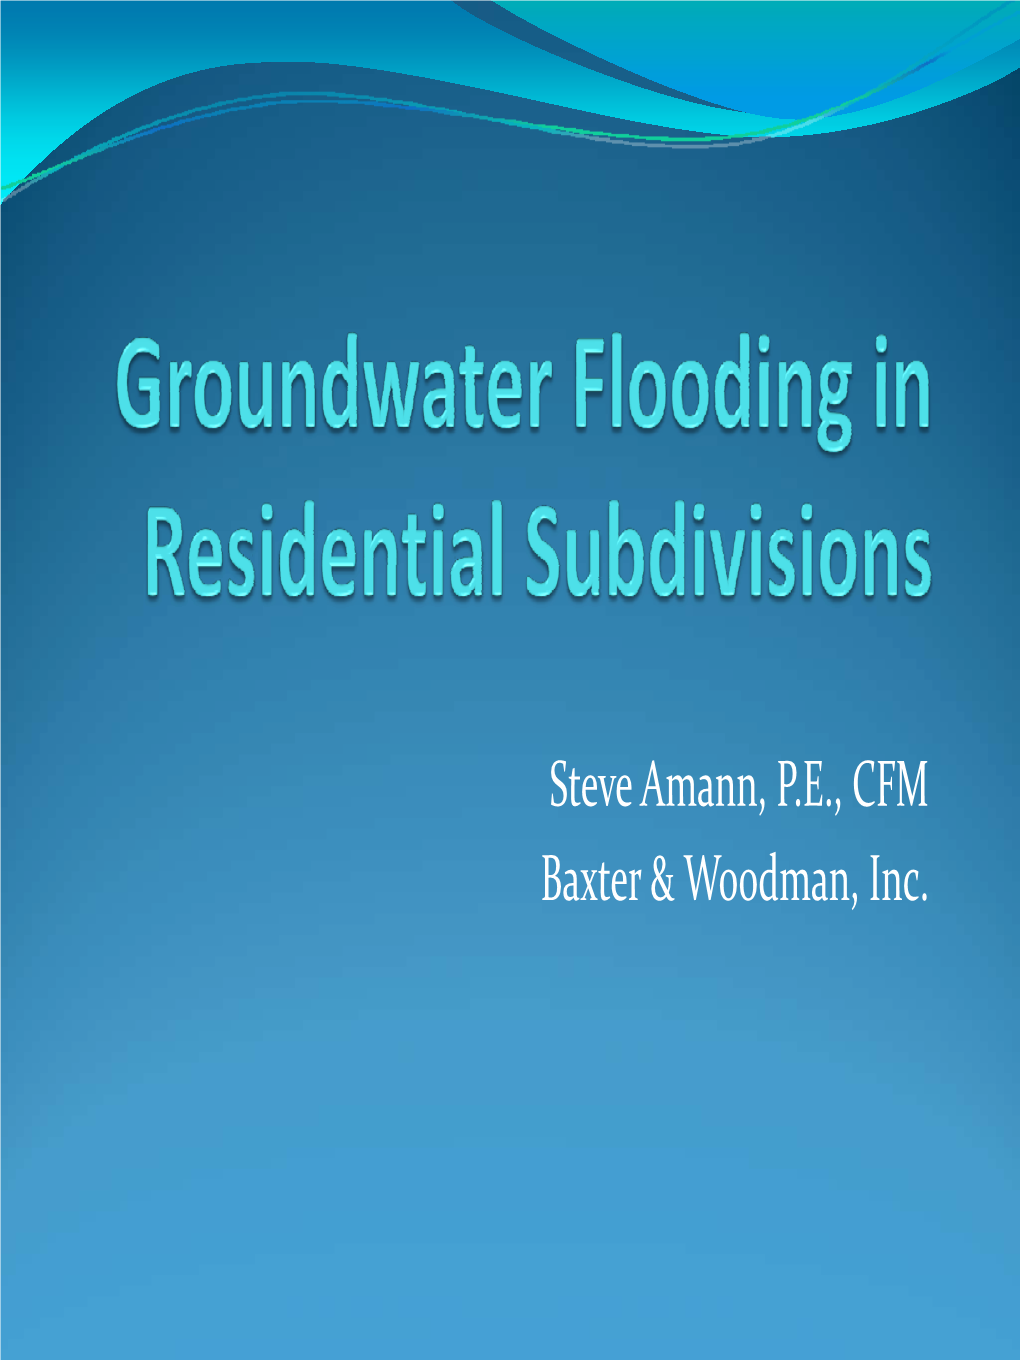 1D Groundwater Flooding in Residential Subdivisions